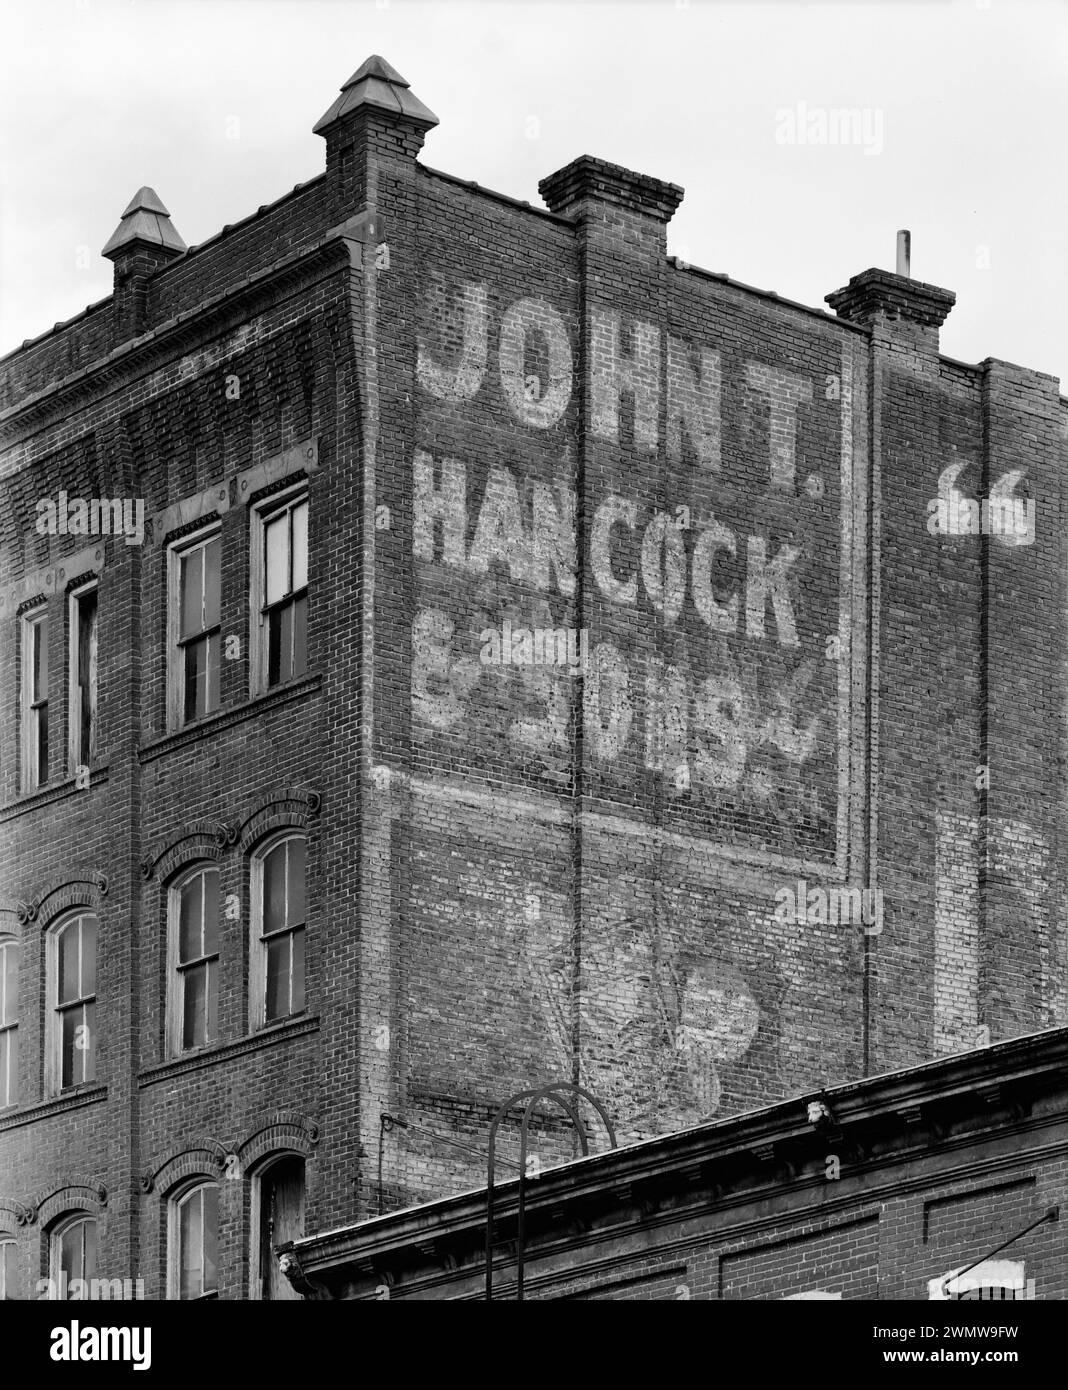 Upper level detail of  Southeast side, showing parapet, chimneys and party wall sign. View to North - Commercial & industrial Buildings,  Bishop's Block, 90 Main Street, Dubuque Stock Photo